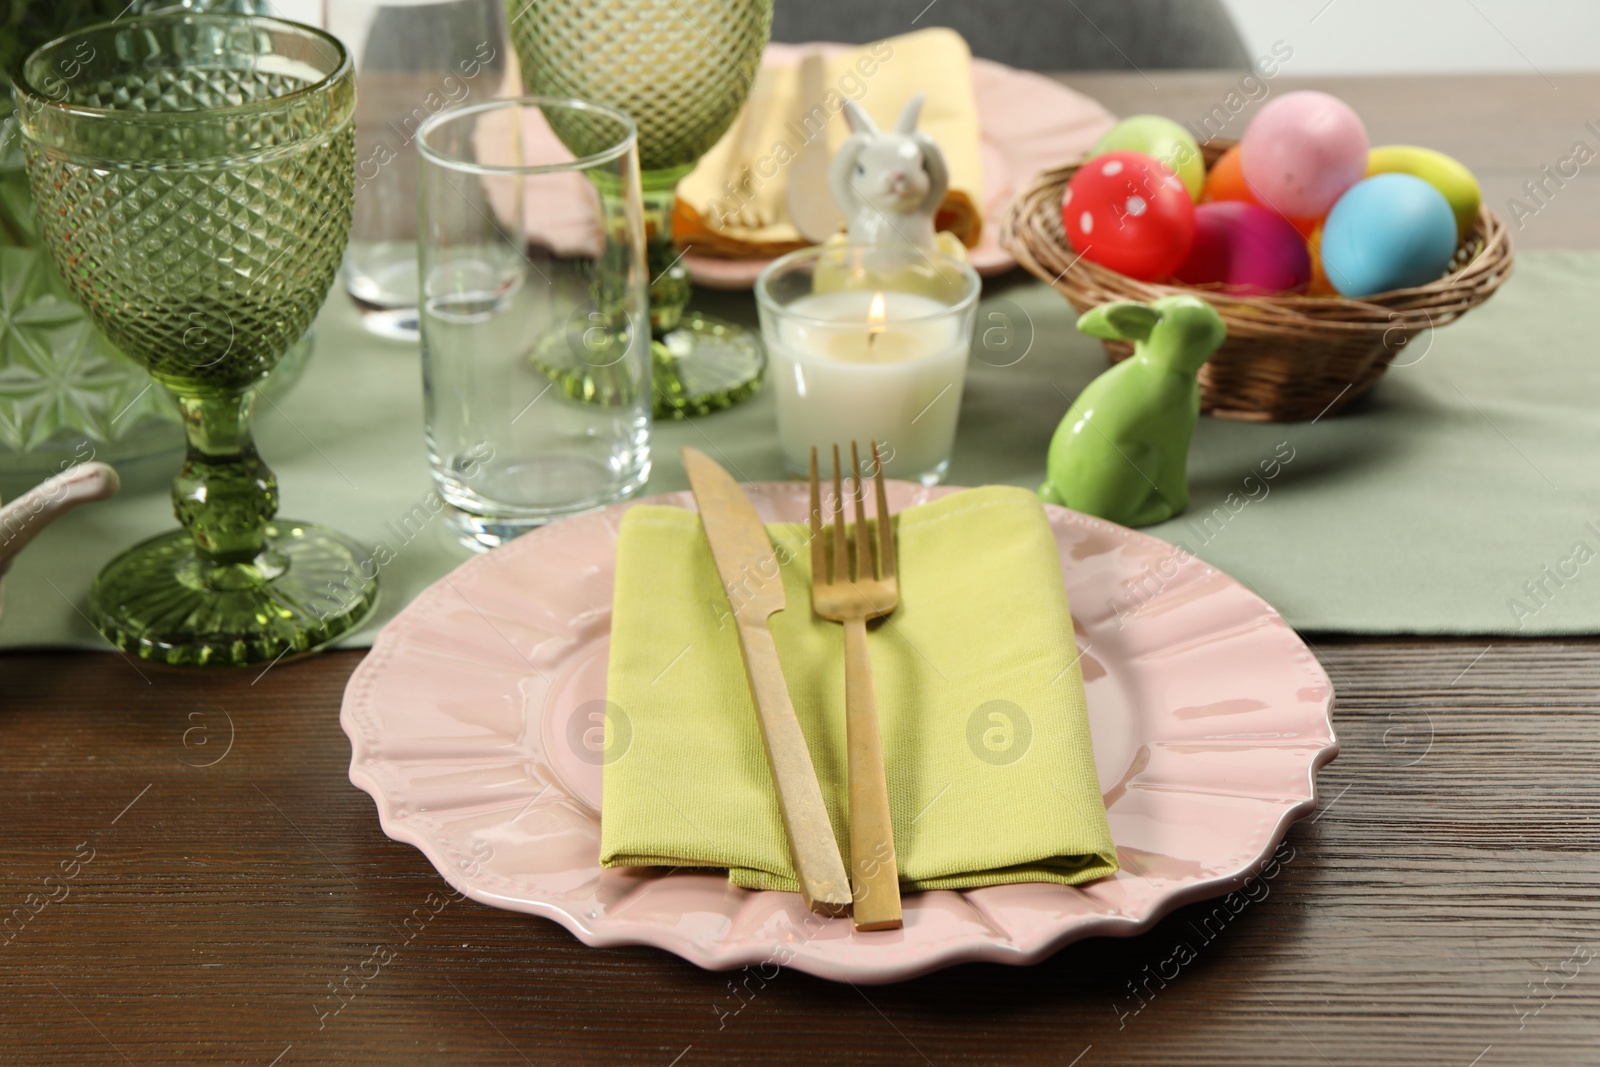 Photo of Easter celebration. Festive table setting with painted eggs.